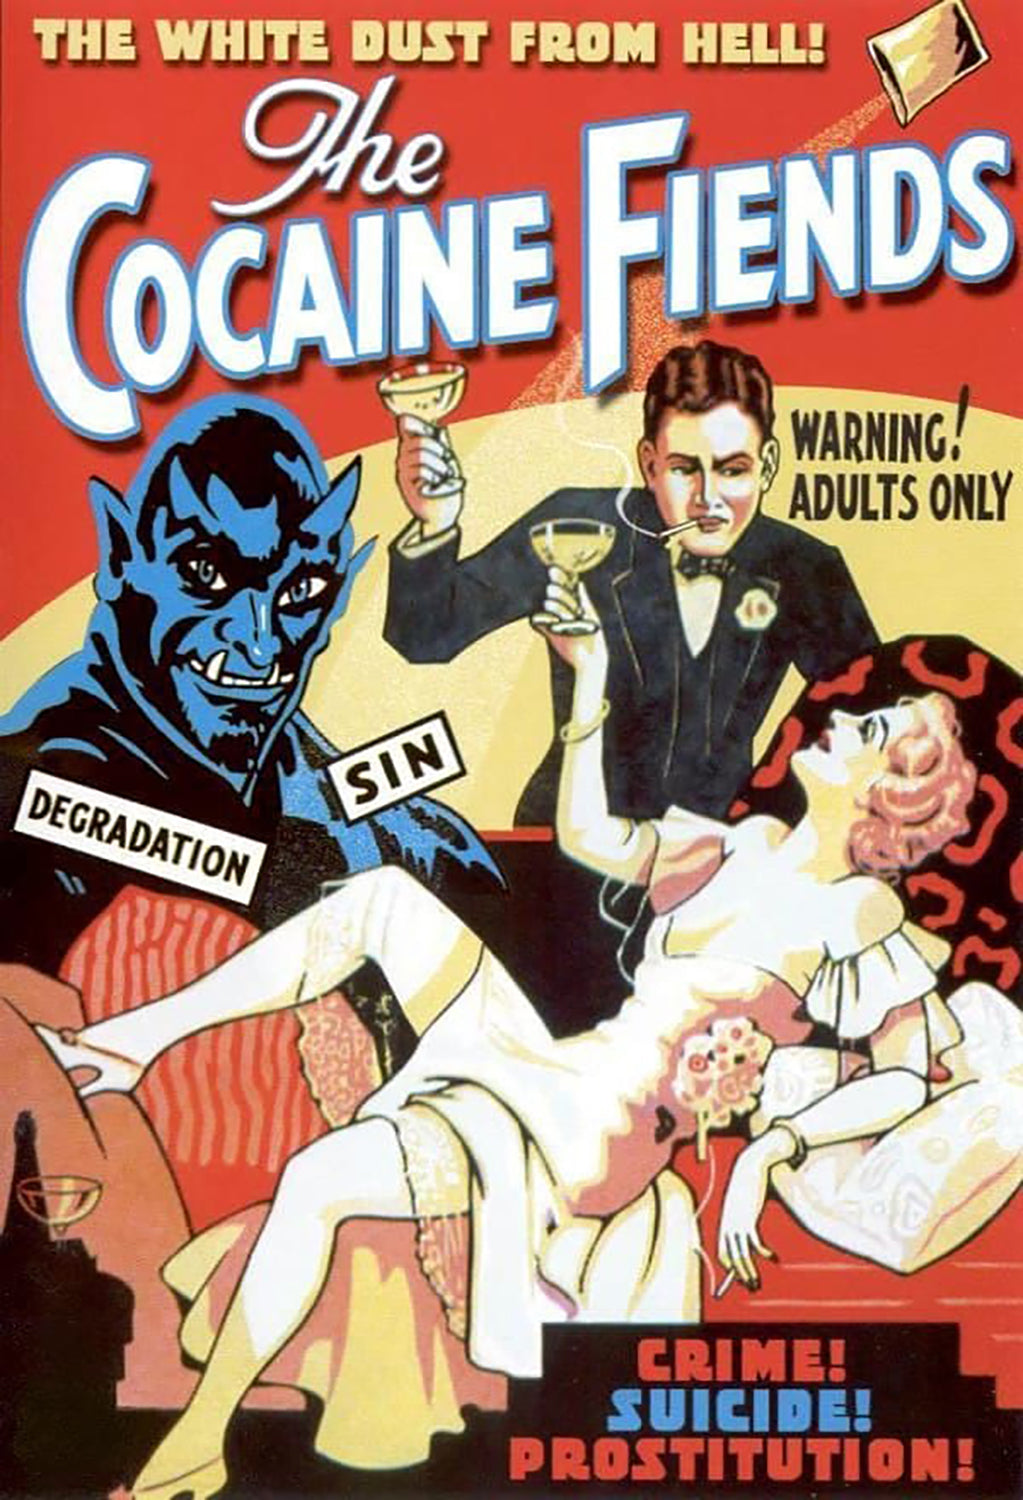 The Cocaine Fiends (1935) Vintage Movie Poster